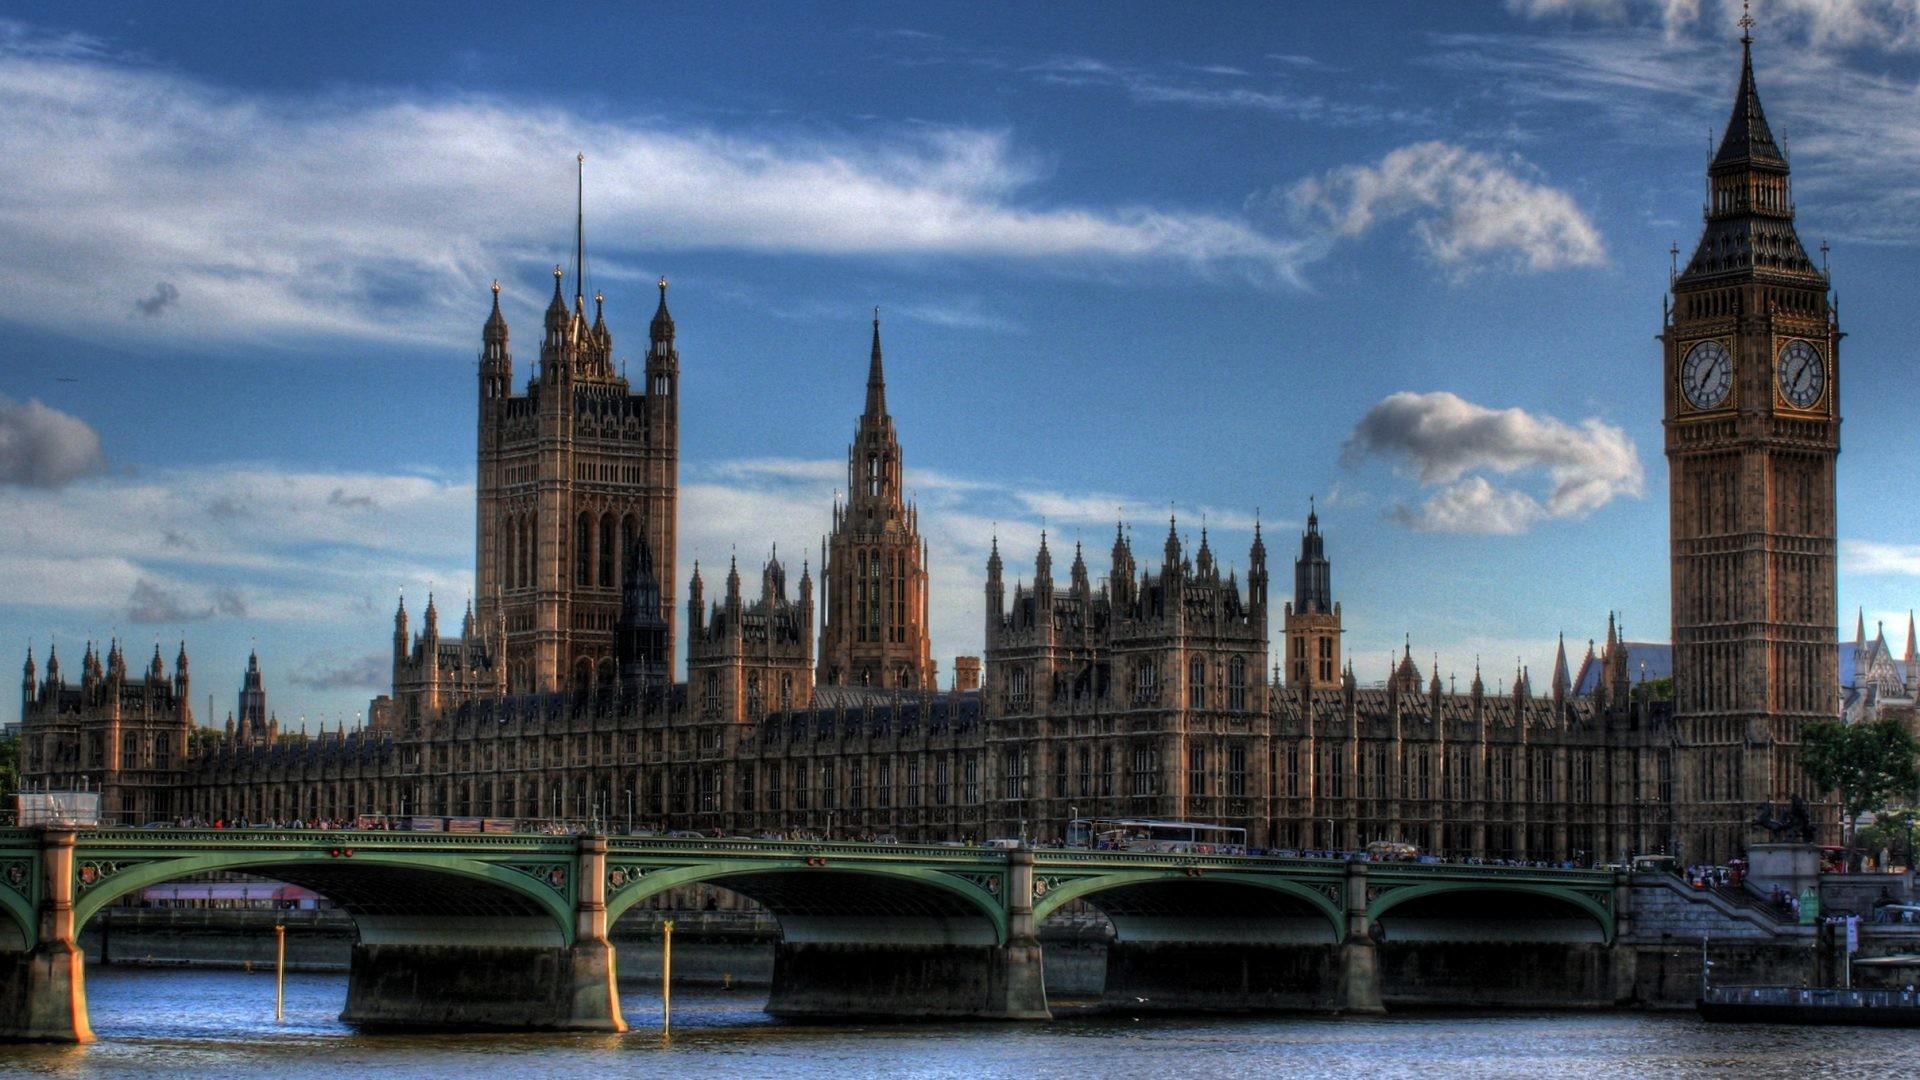 1920x1080 Parliament Dual Monitor Uk Westminster England Palace Full HD Wallpaper